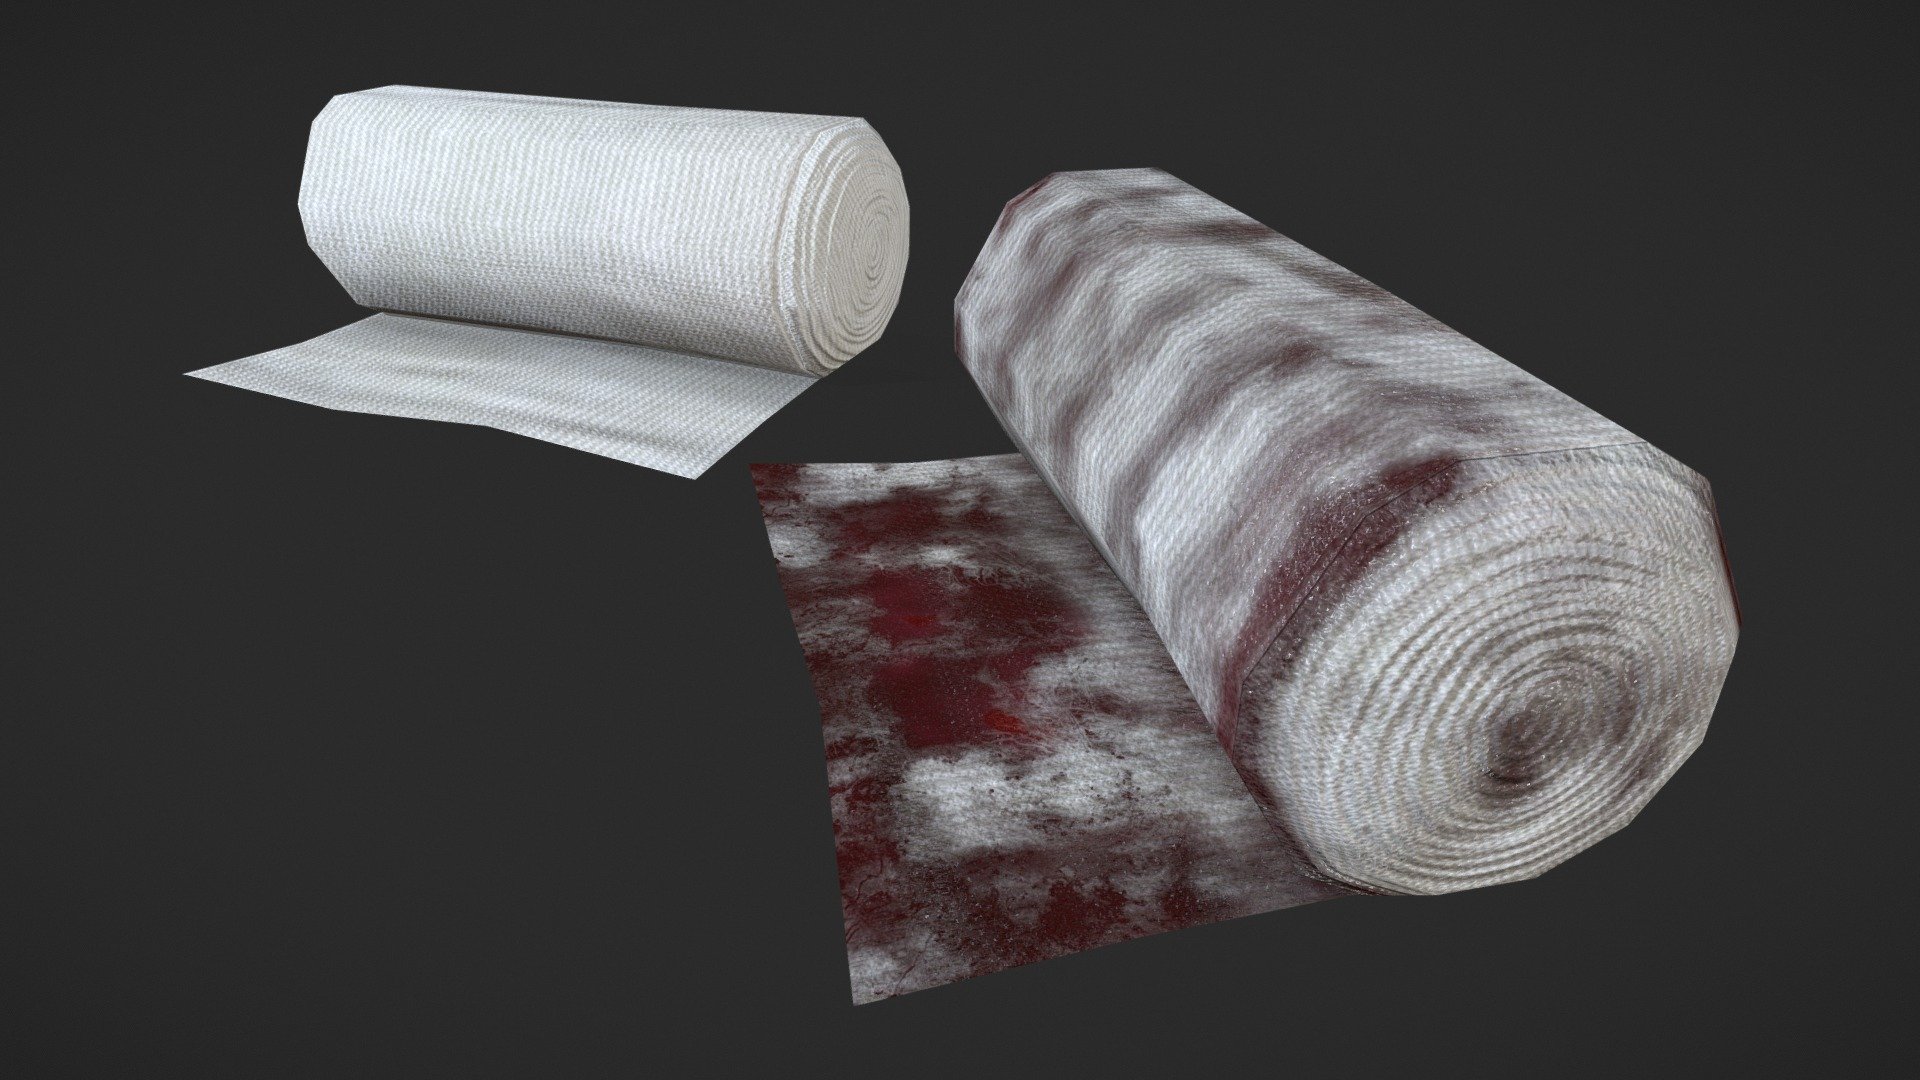 Bandage PBR Asset

Detailed Low Poly Bandage with High-Quality PBR Texturing.

Contains two types of textures - Blood and Clean

Fits perfect for any PBR game engine

Standard Textures Maps AO, Base Color, Height, Metallic, Normal, Roughness

Unreal 4 Textures Base Color, Normal, Occlusion Roughness Metallic

Unity 5 Textures Albedo Transparency, Metallic Smoothness, Normal

2048x2048 PNG Textures

PBR Textures Only.

Low Poly Triangles

152 Tris, 84 Verts, 82 Faces

File Formats :

.FBX .OBJ .BLEND

Modeled in Blender and then textured in Substance Painter. Enjoy! ^_____^ - Bandage PBR - Buy Royalty Free 3D model by Daniil Kulinich (@dk_artist) 3d model